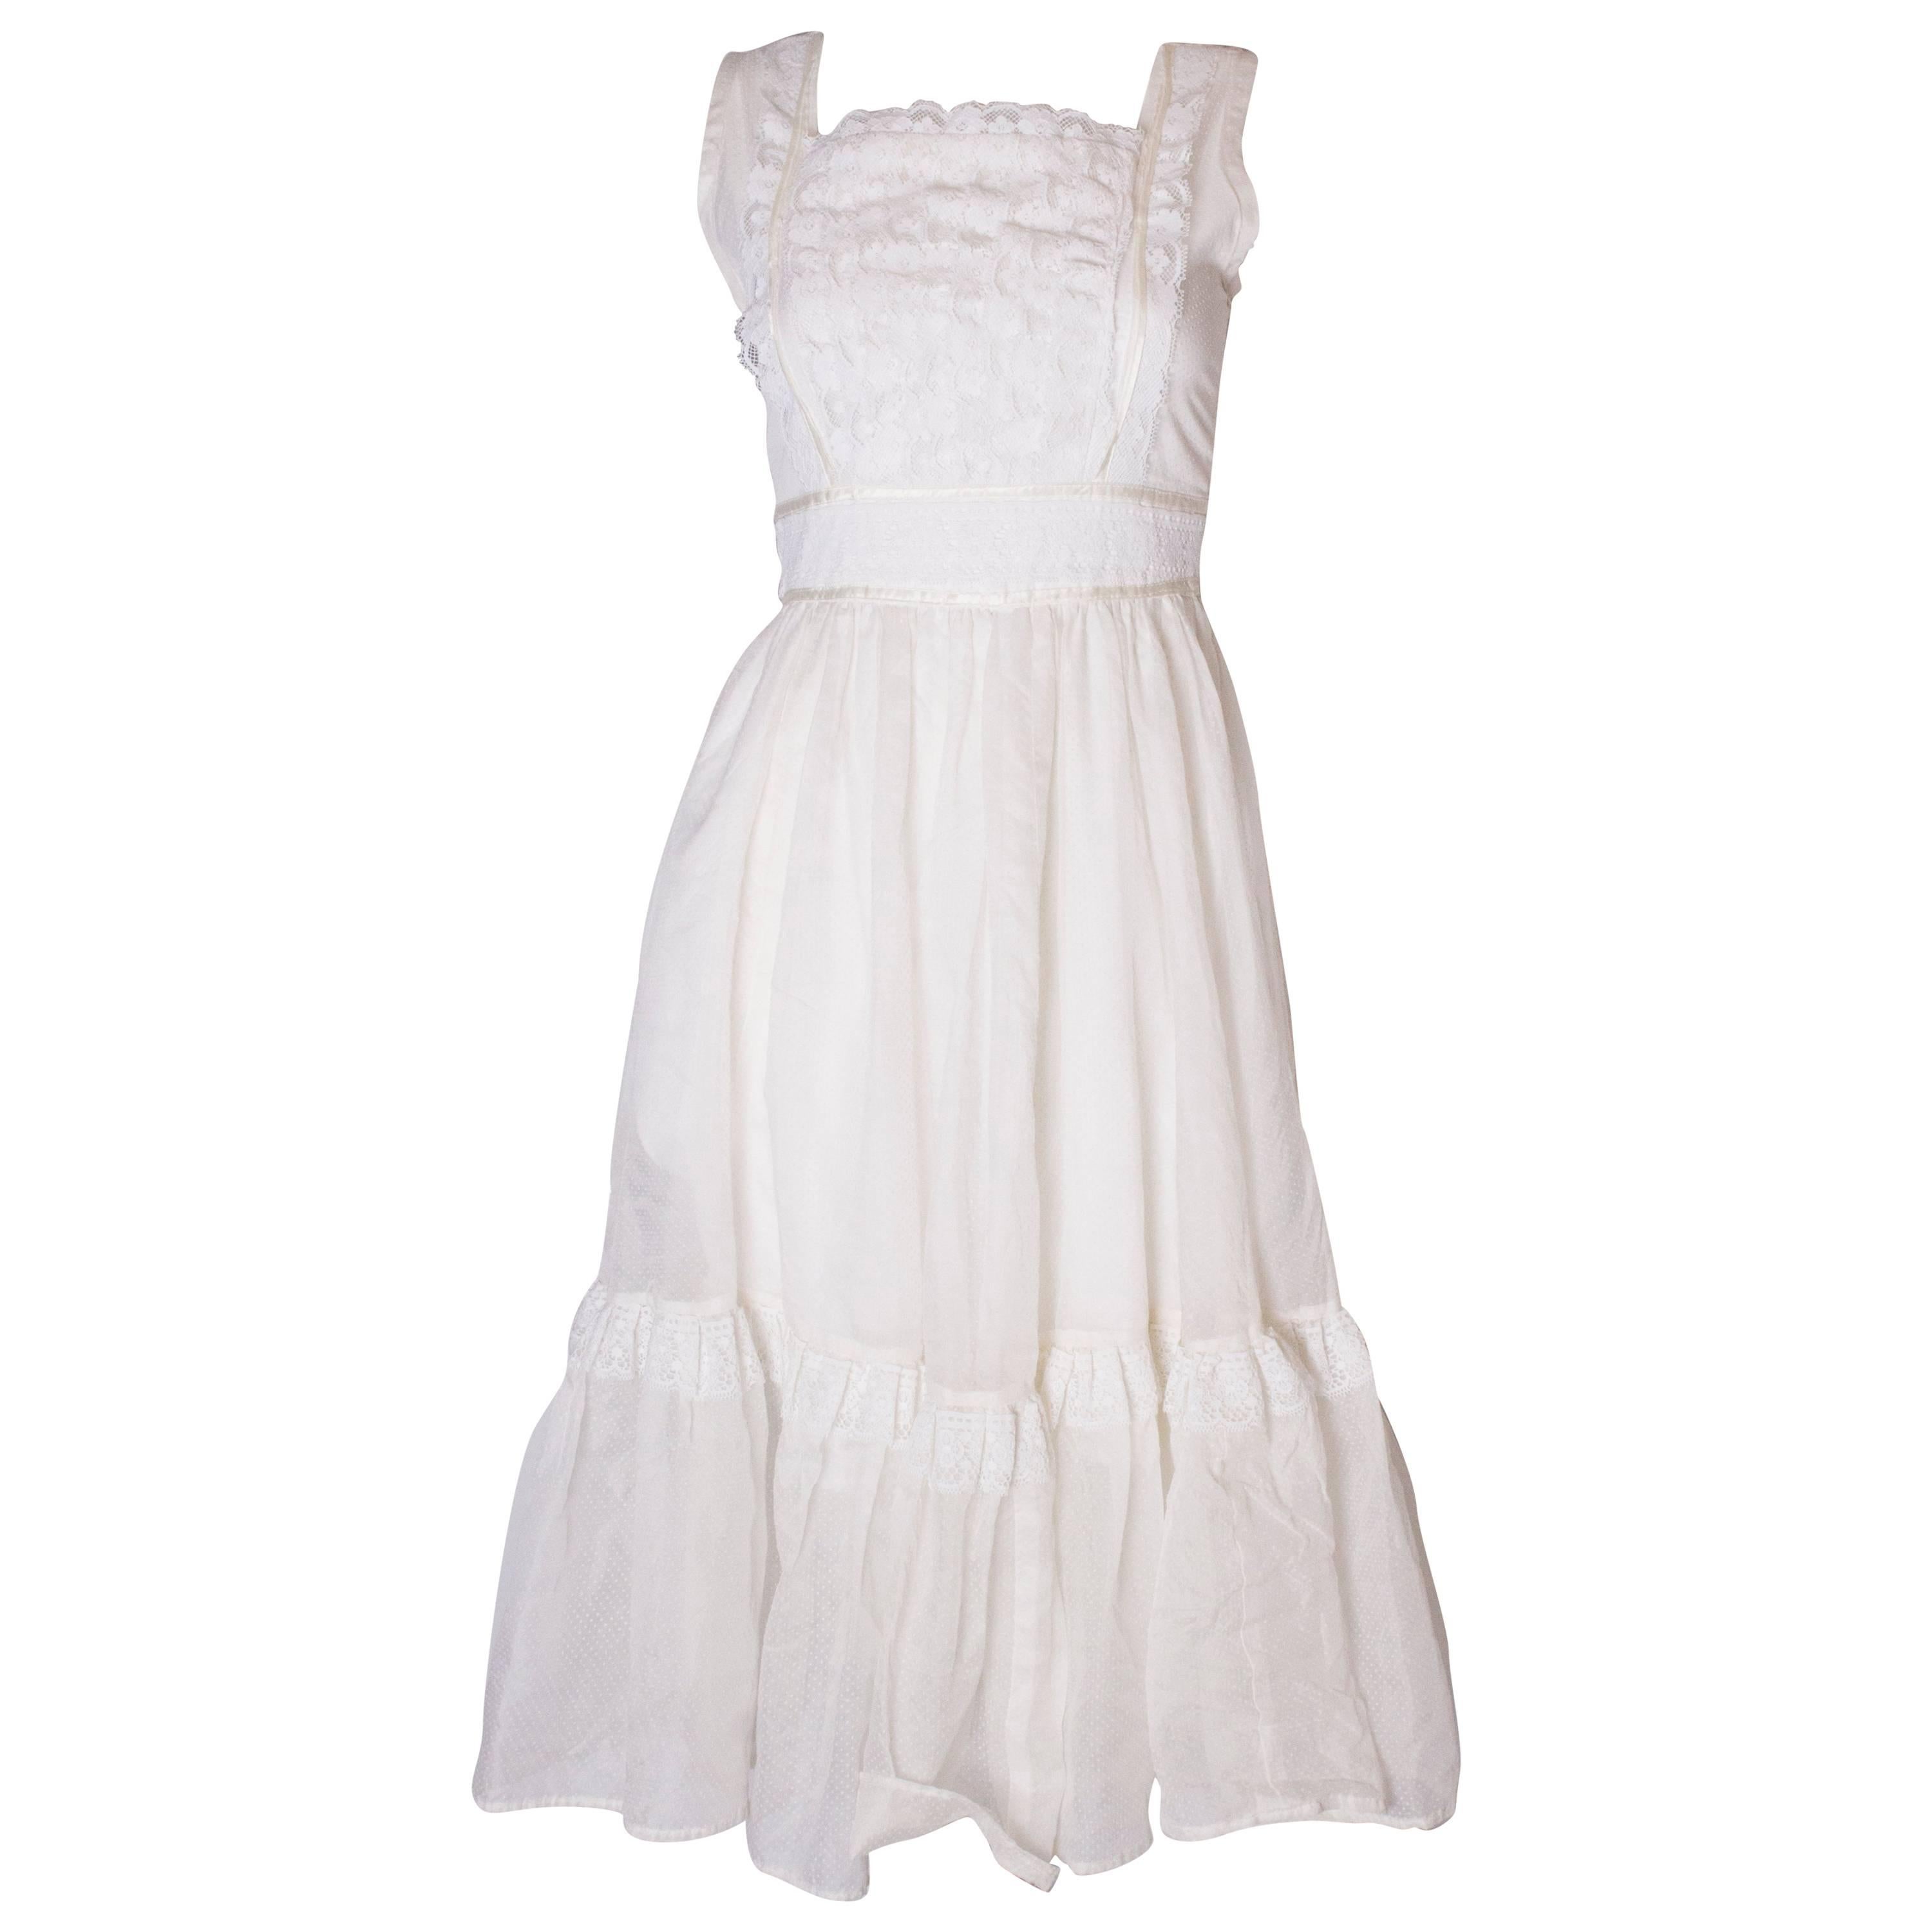 A vintage 1950s White Spotted and Lace summer Dress For Sale